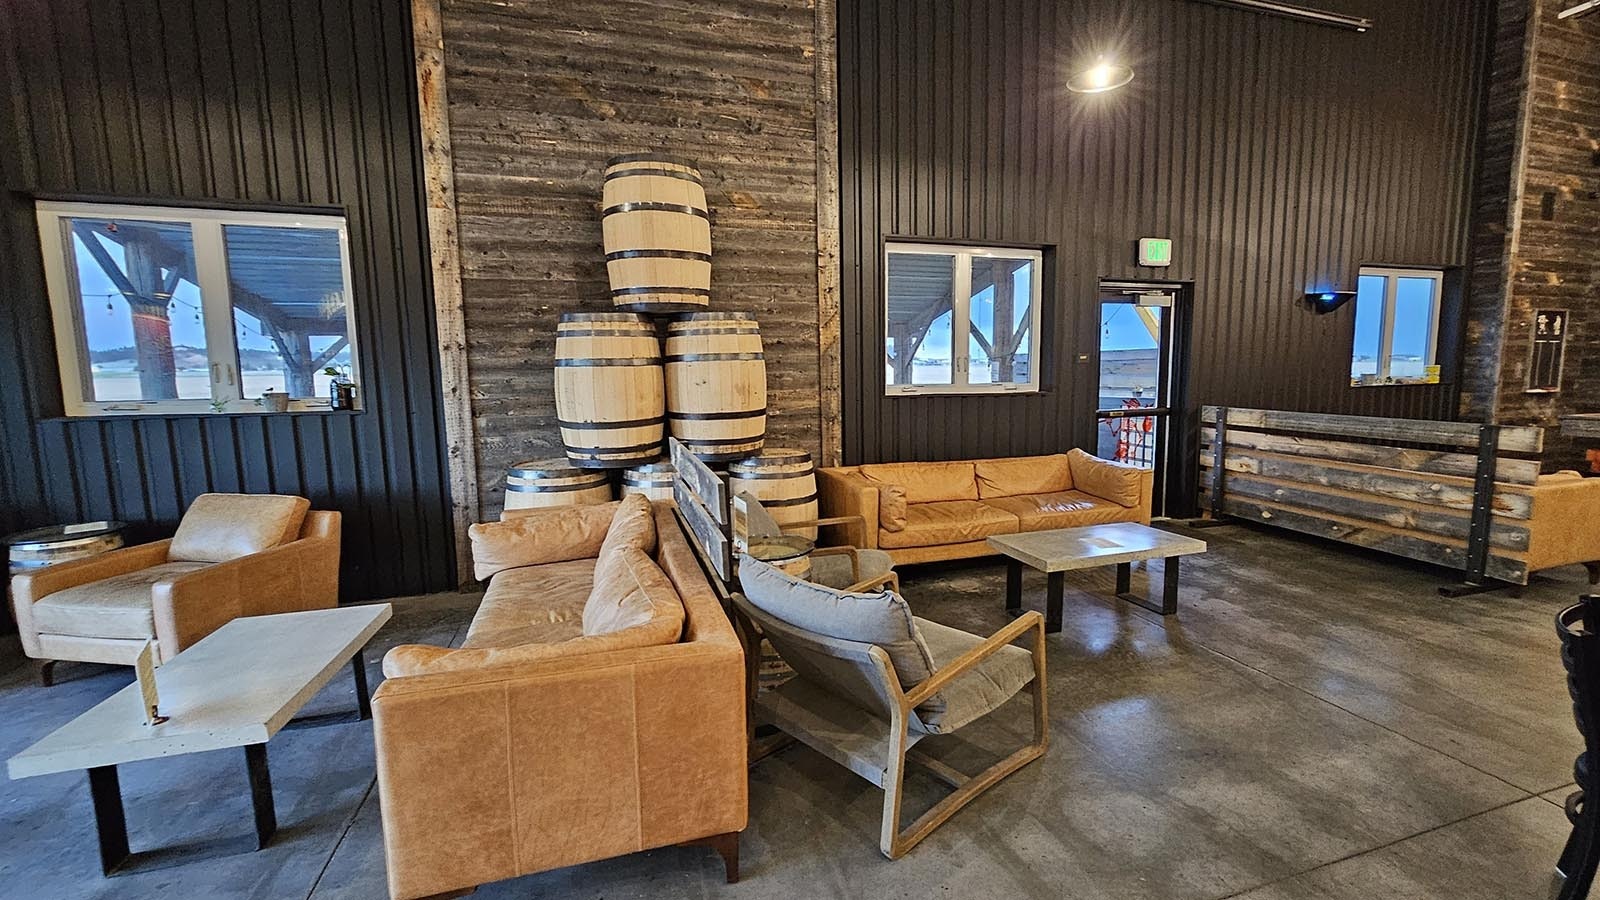 Comfortable seating areas are available for groups in Pine Bluffs Distilling's tasting room.